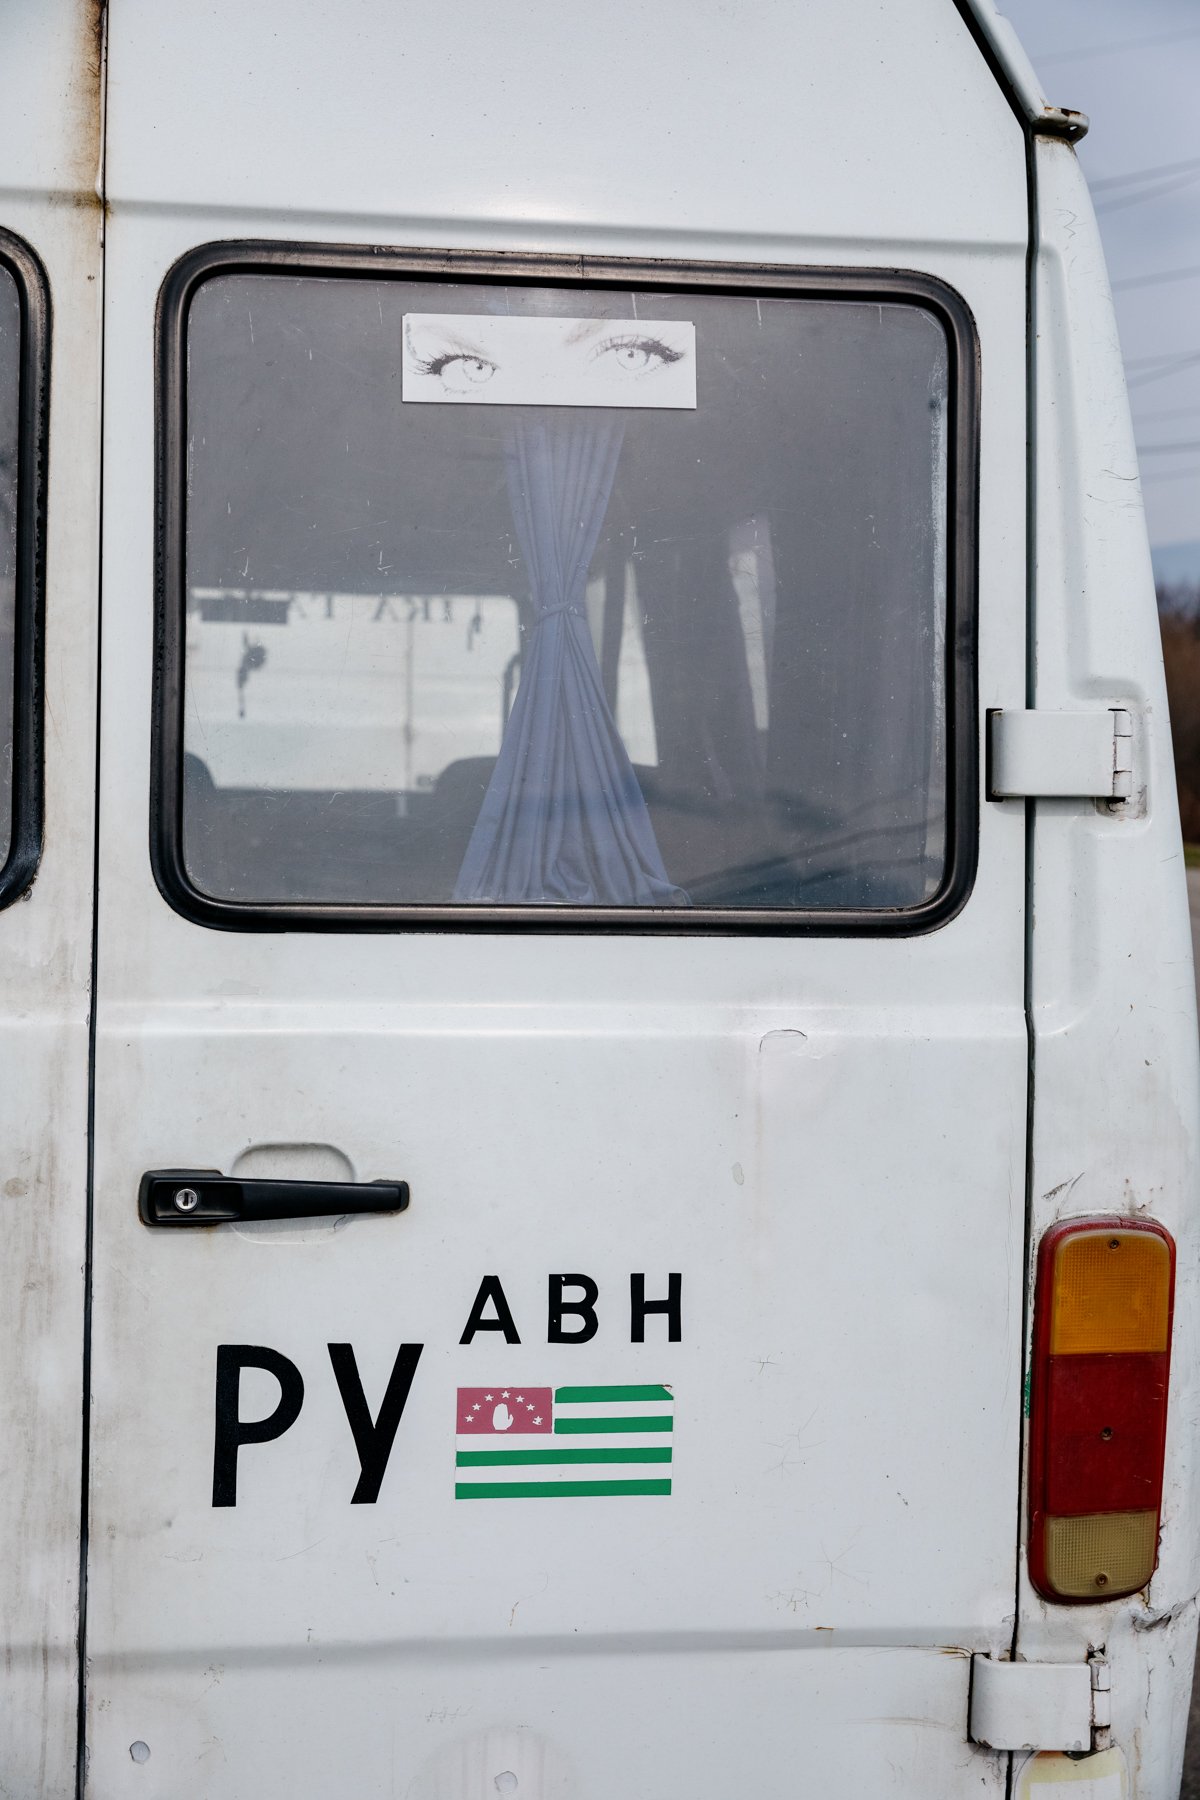  Private minibuses provide transport across the Enguri Bridge for 1 lari. Only vehicles with Abkhaz-issued number plates are permitted on the Abkhazian side. 